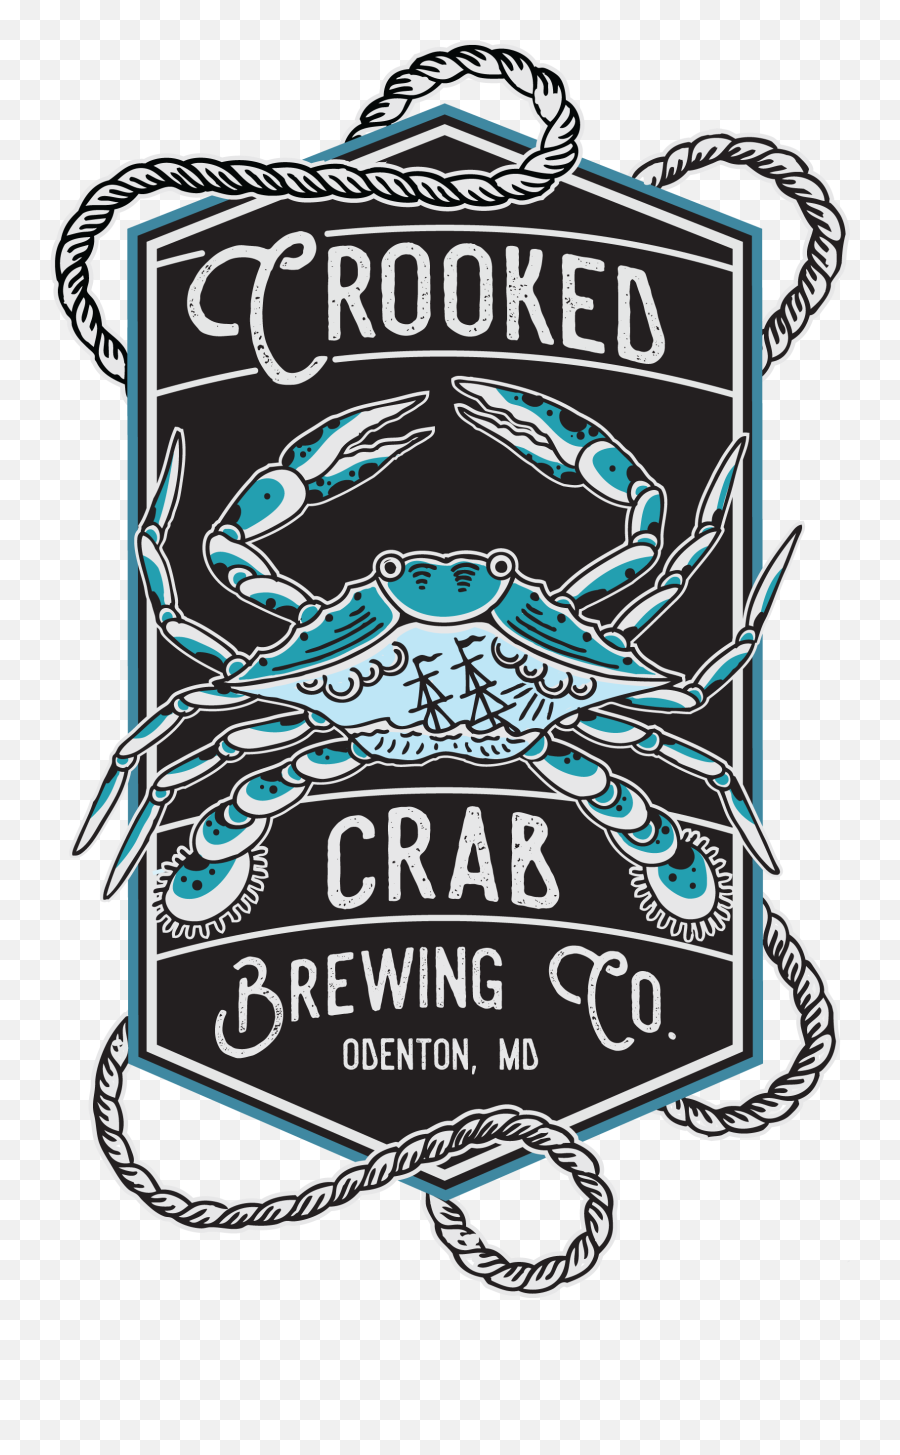 Crooked Crab Brewing Co - Chesapeake Blue Crab Png,Knife Party Logo